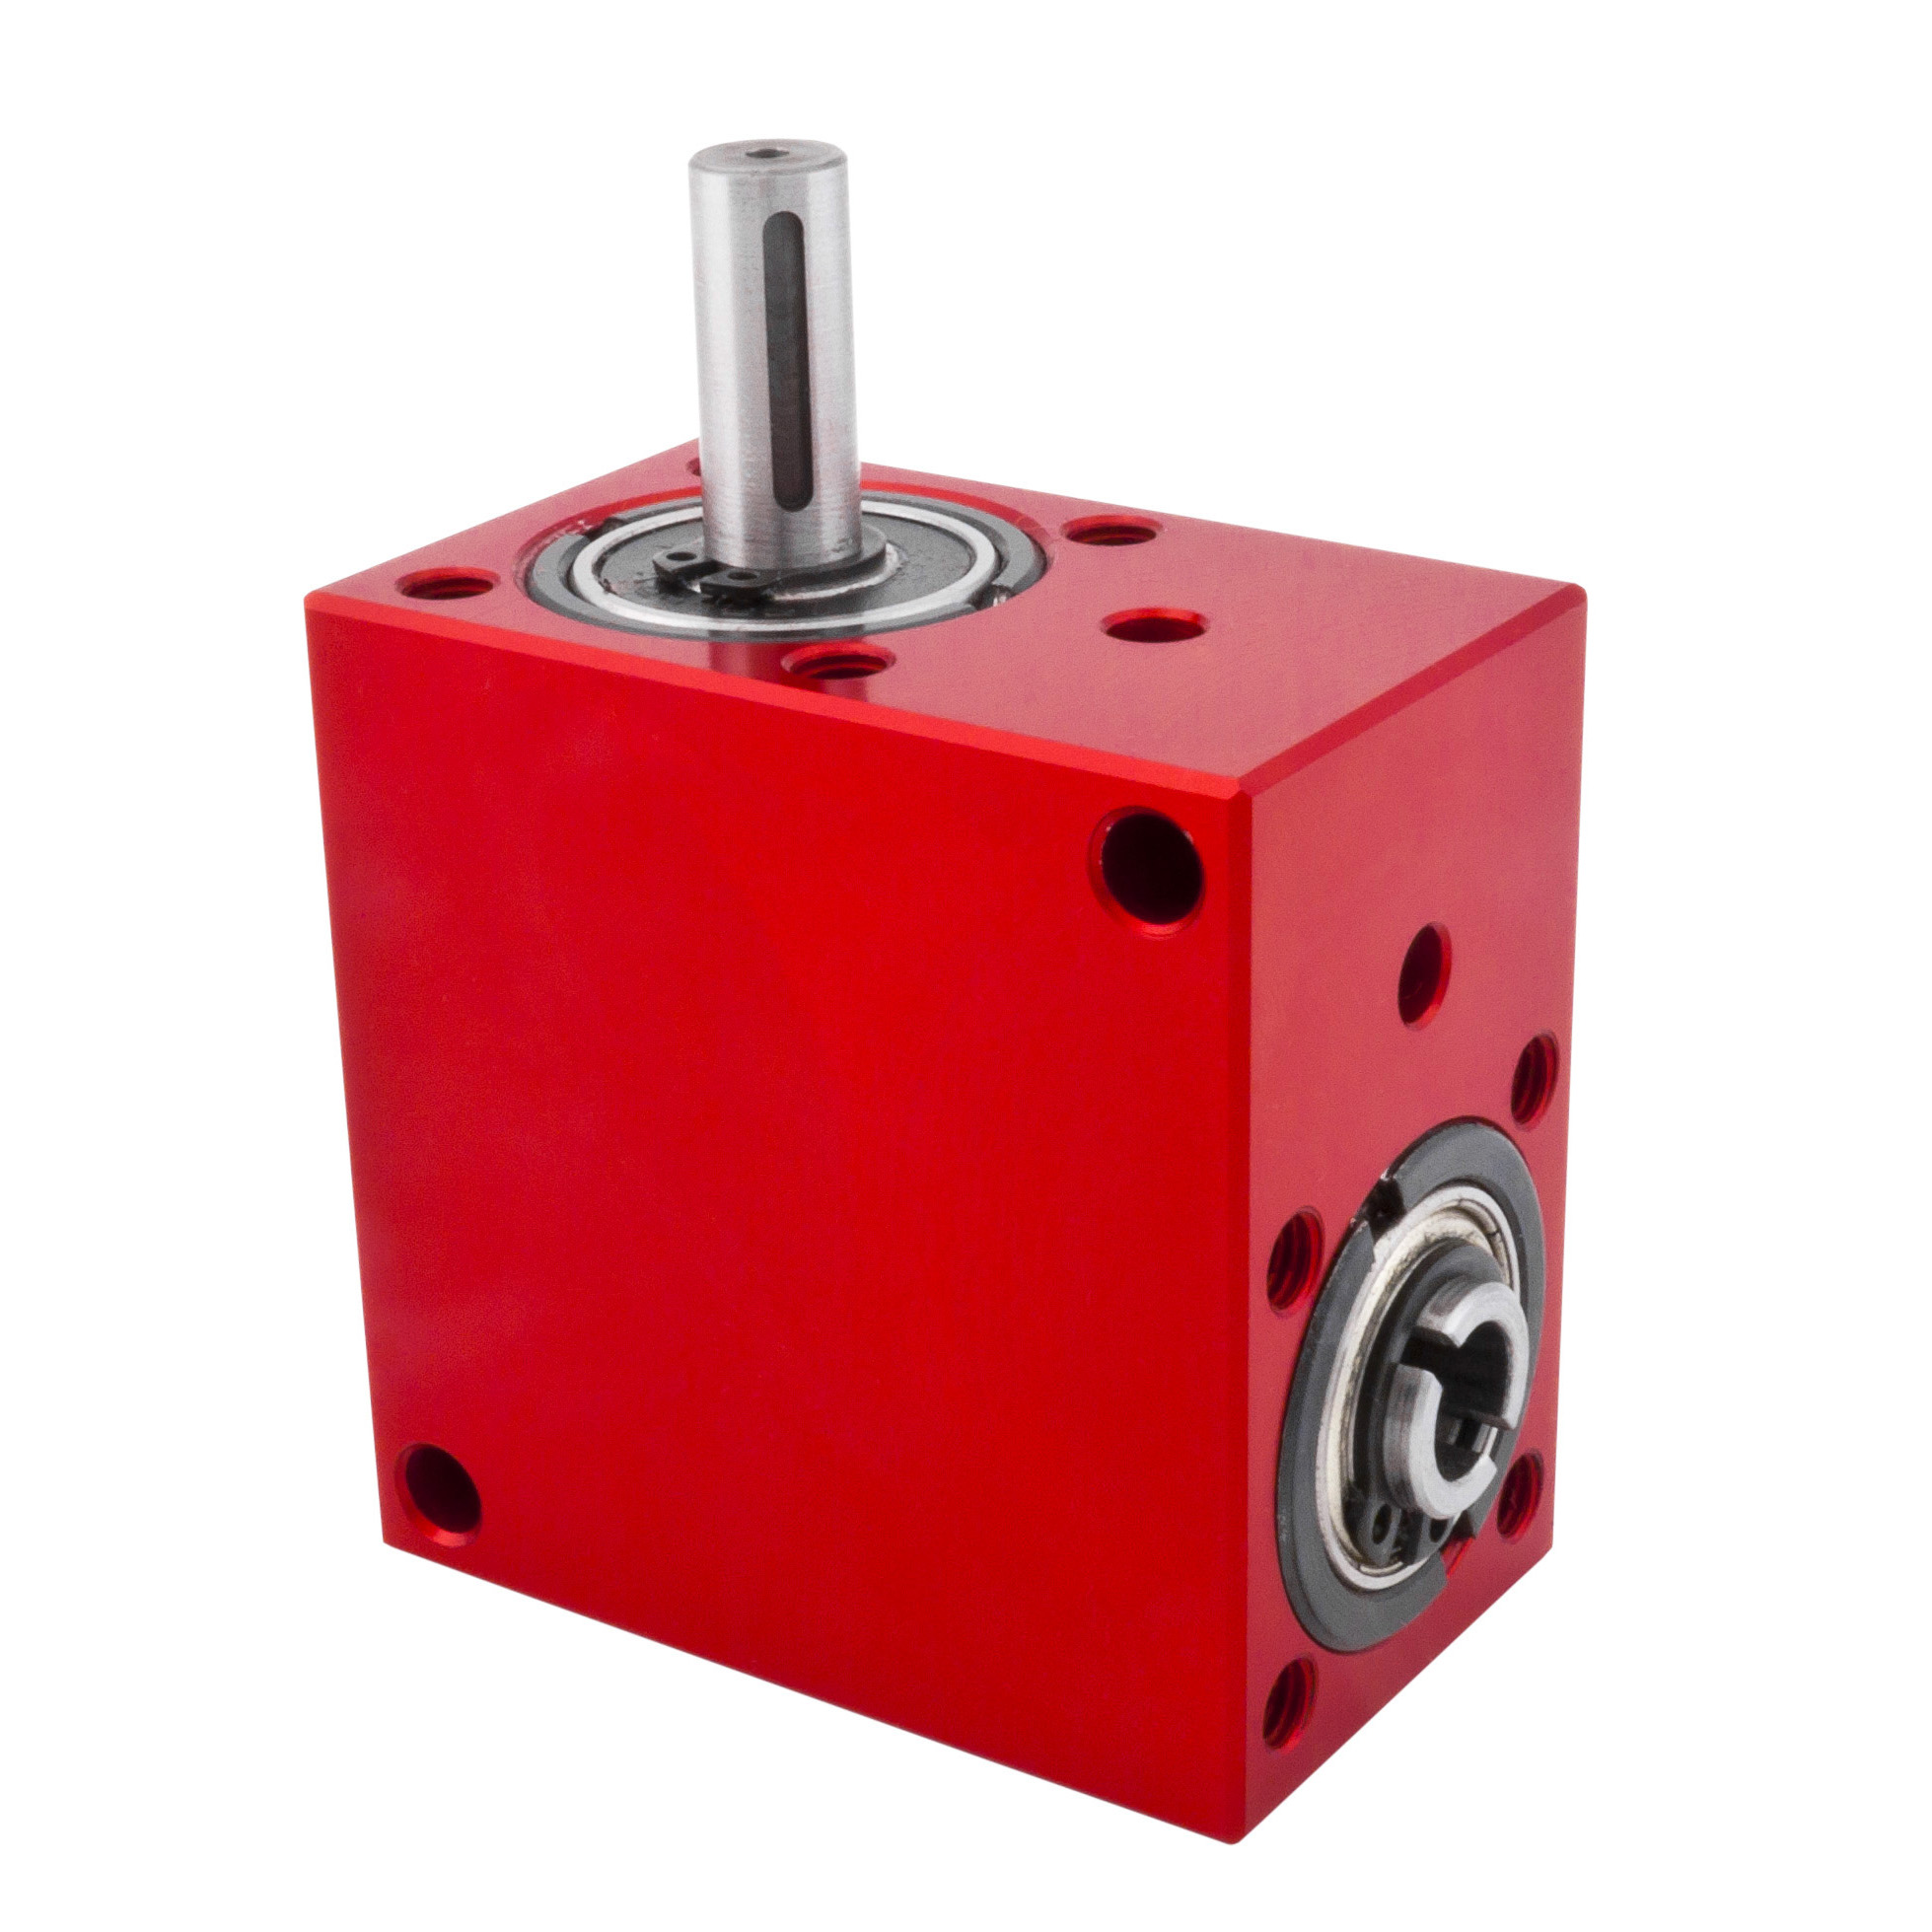 Right angled gearbox, bored shafts - up to 4.47 Nm - 1 bored shaft/1 solid shaft - 3000rpm